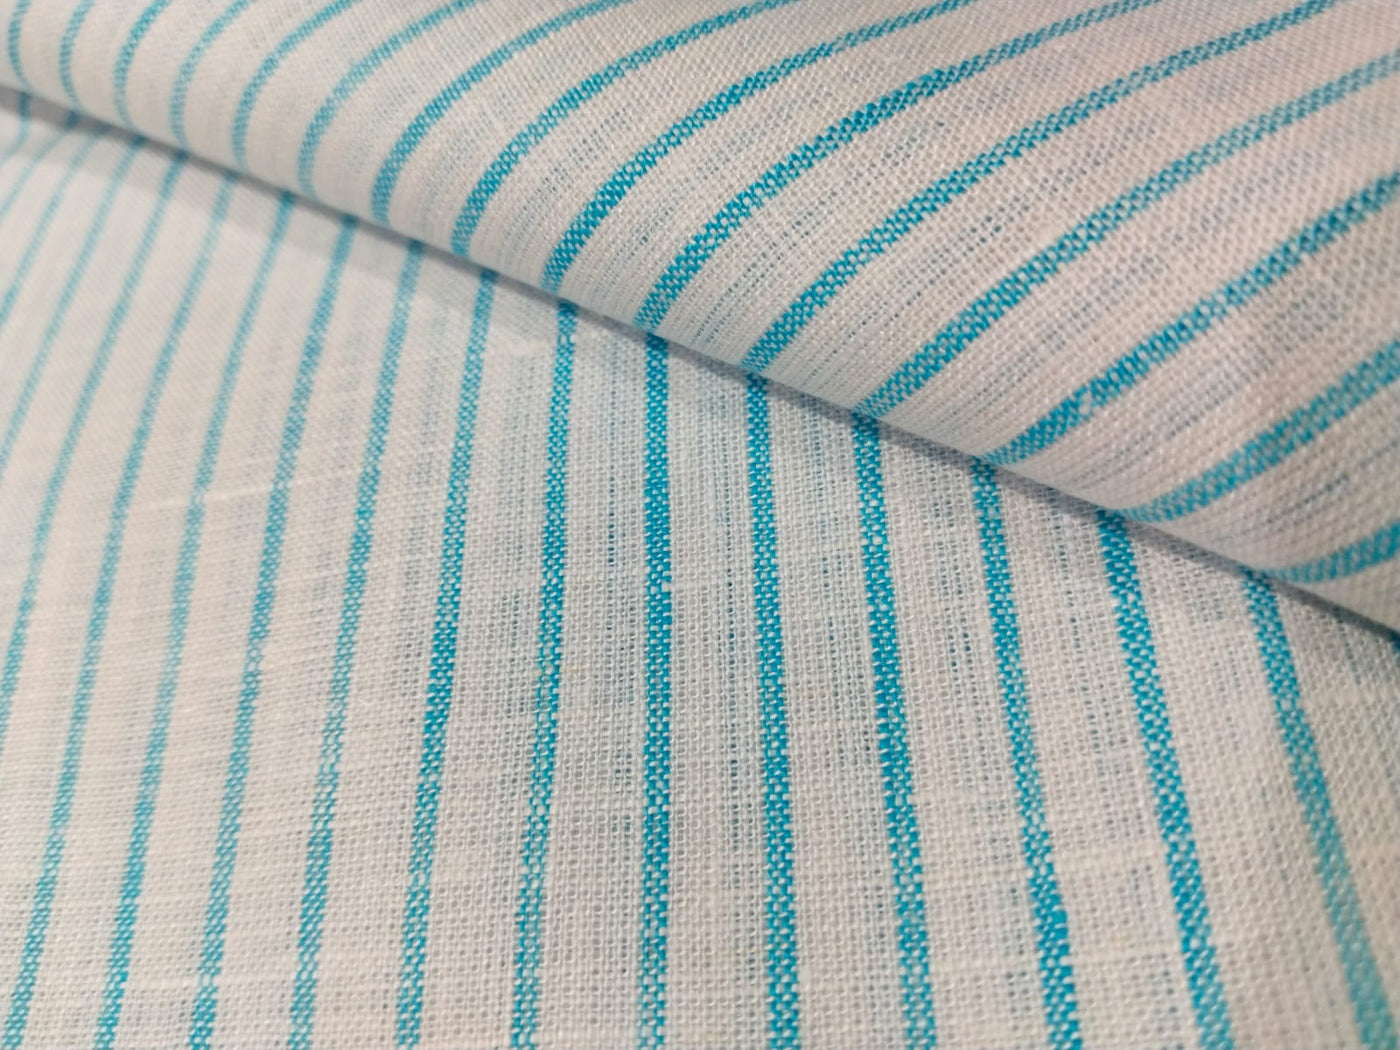 100% Linen stripe 60's Lea Fabric 58" wide available in two colors blue and white and ivory ,yellow, brown[10800]